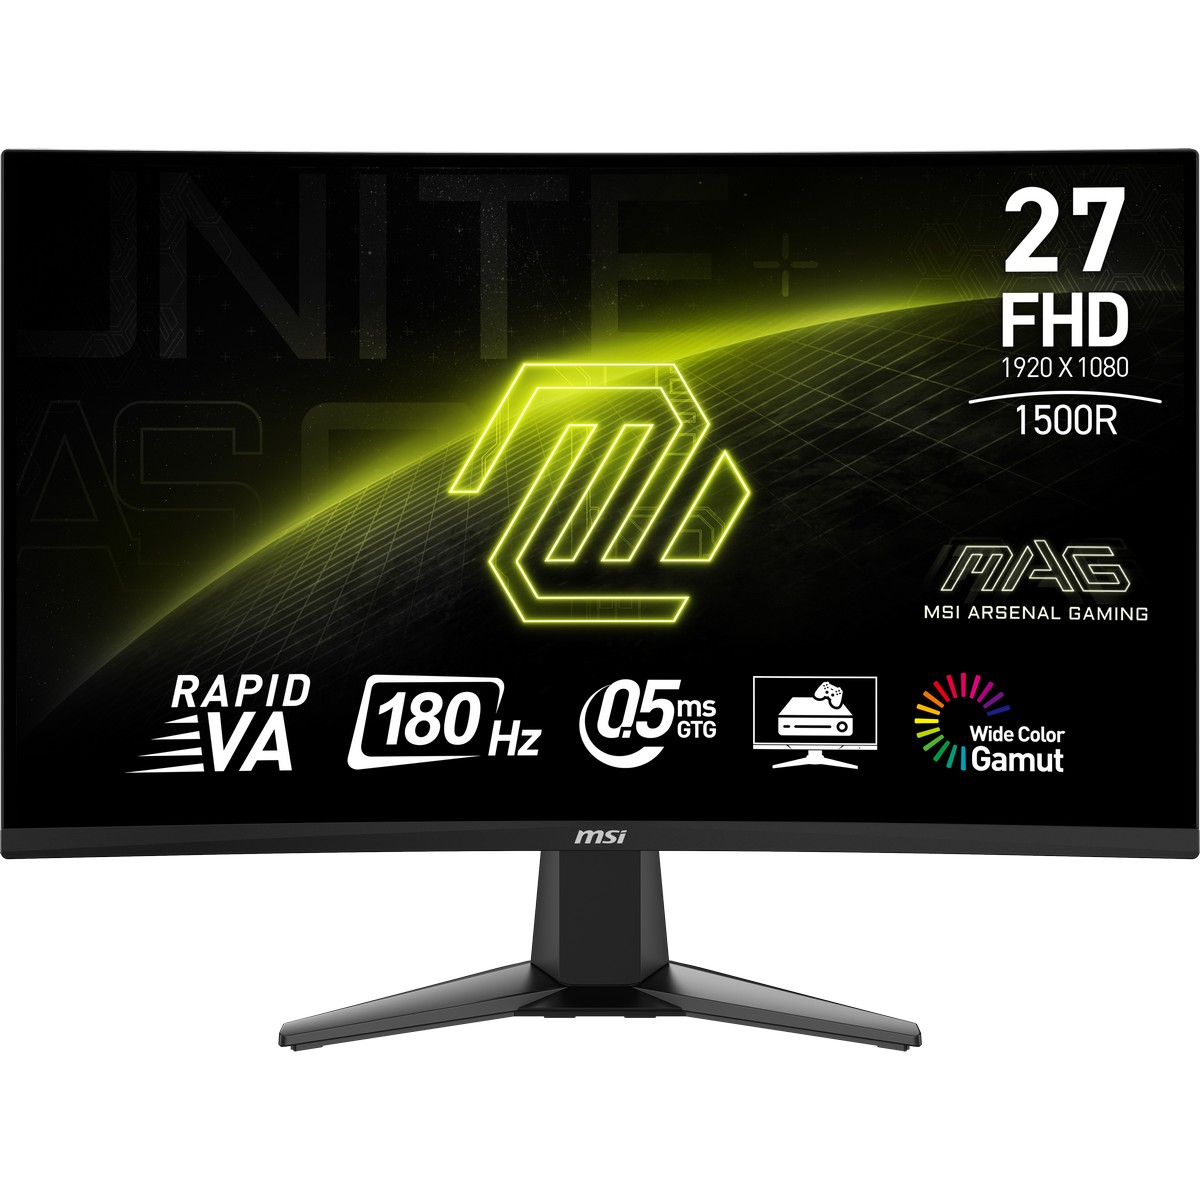 MSI 27" MAG 27C6F 1920x1080 180Hz 0.5ms Rapid VA A-Sync Curved Gaming Monitor